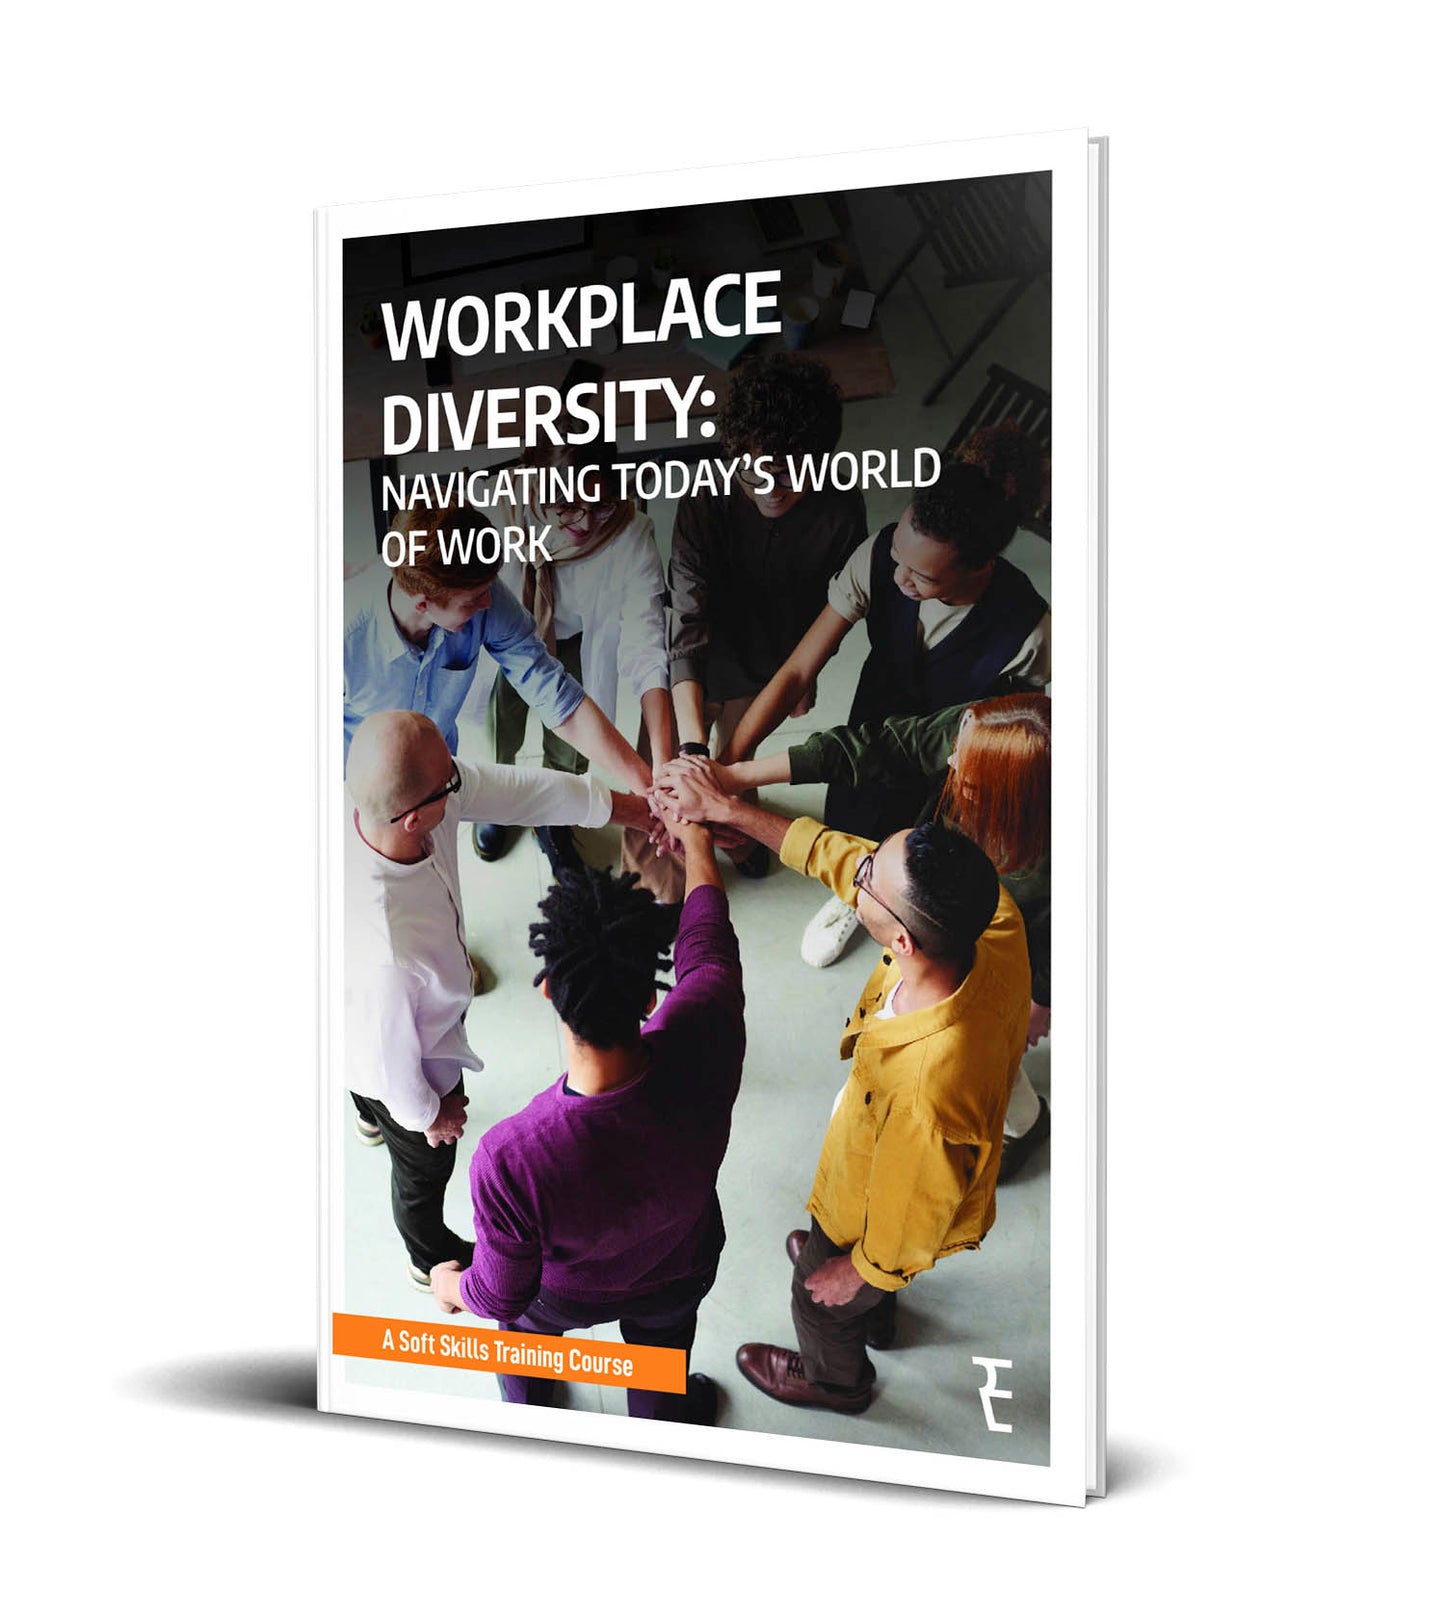 WORKPLACE DIVERSITY: NAVIGATING TODAY'S WORLD OF WORK